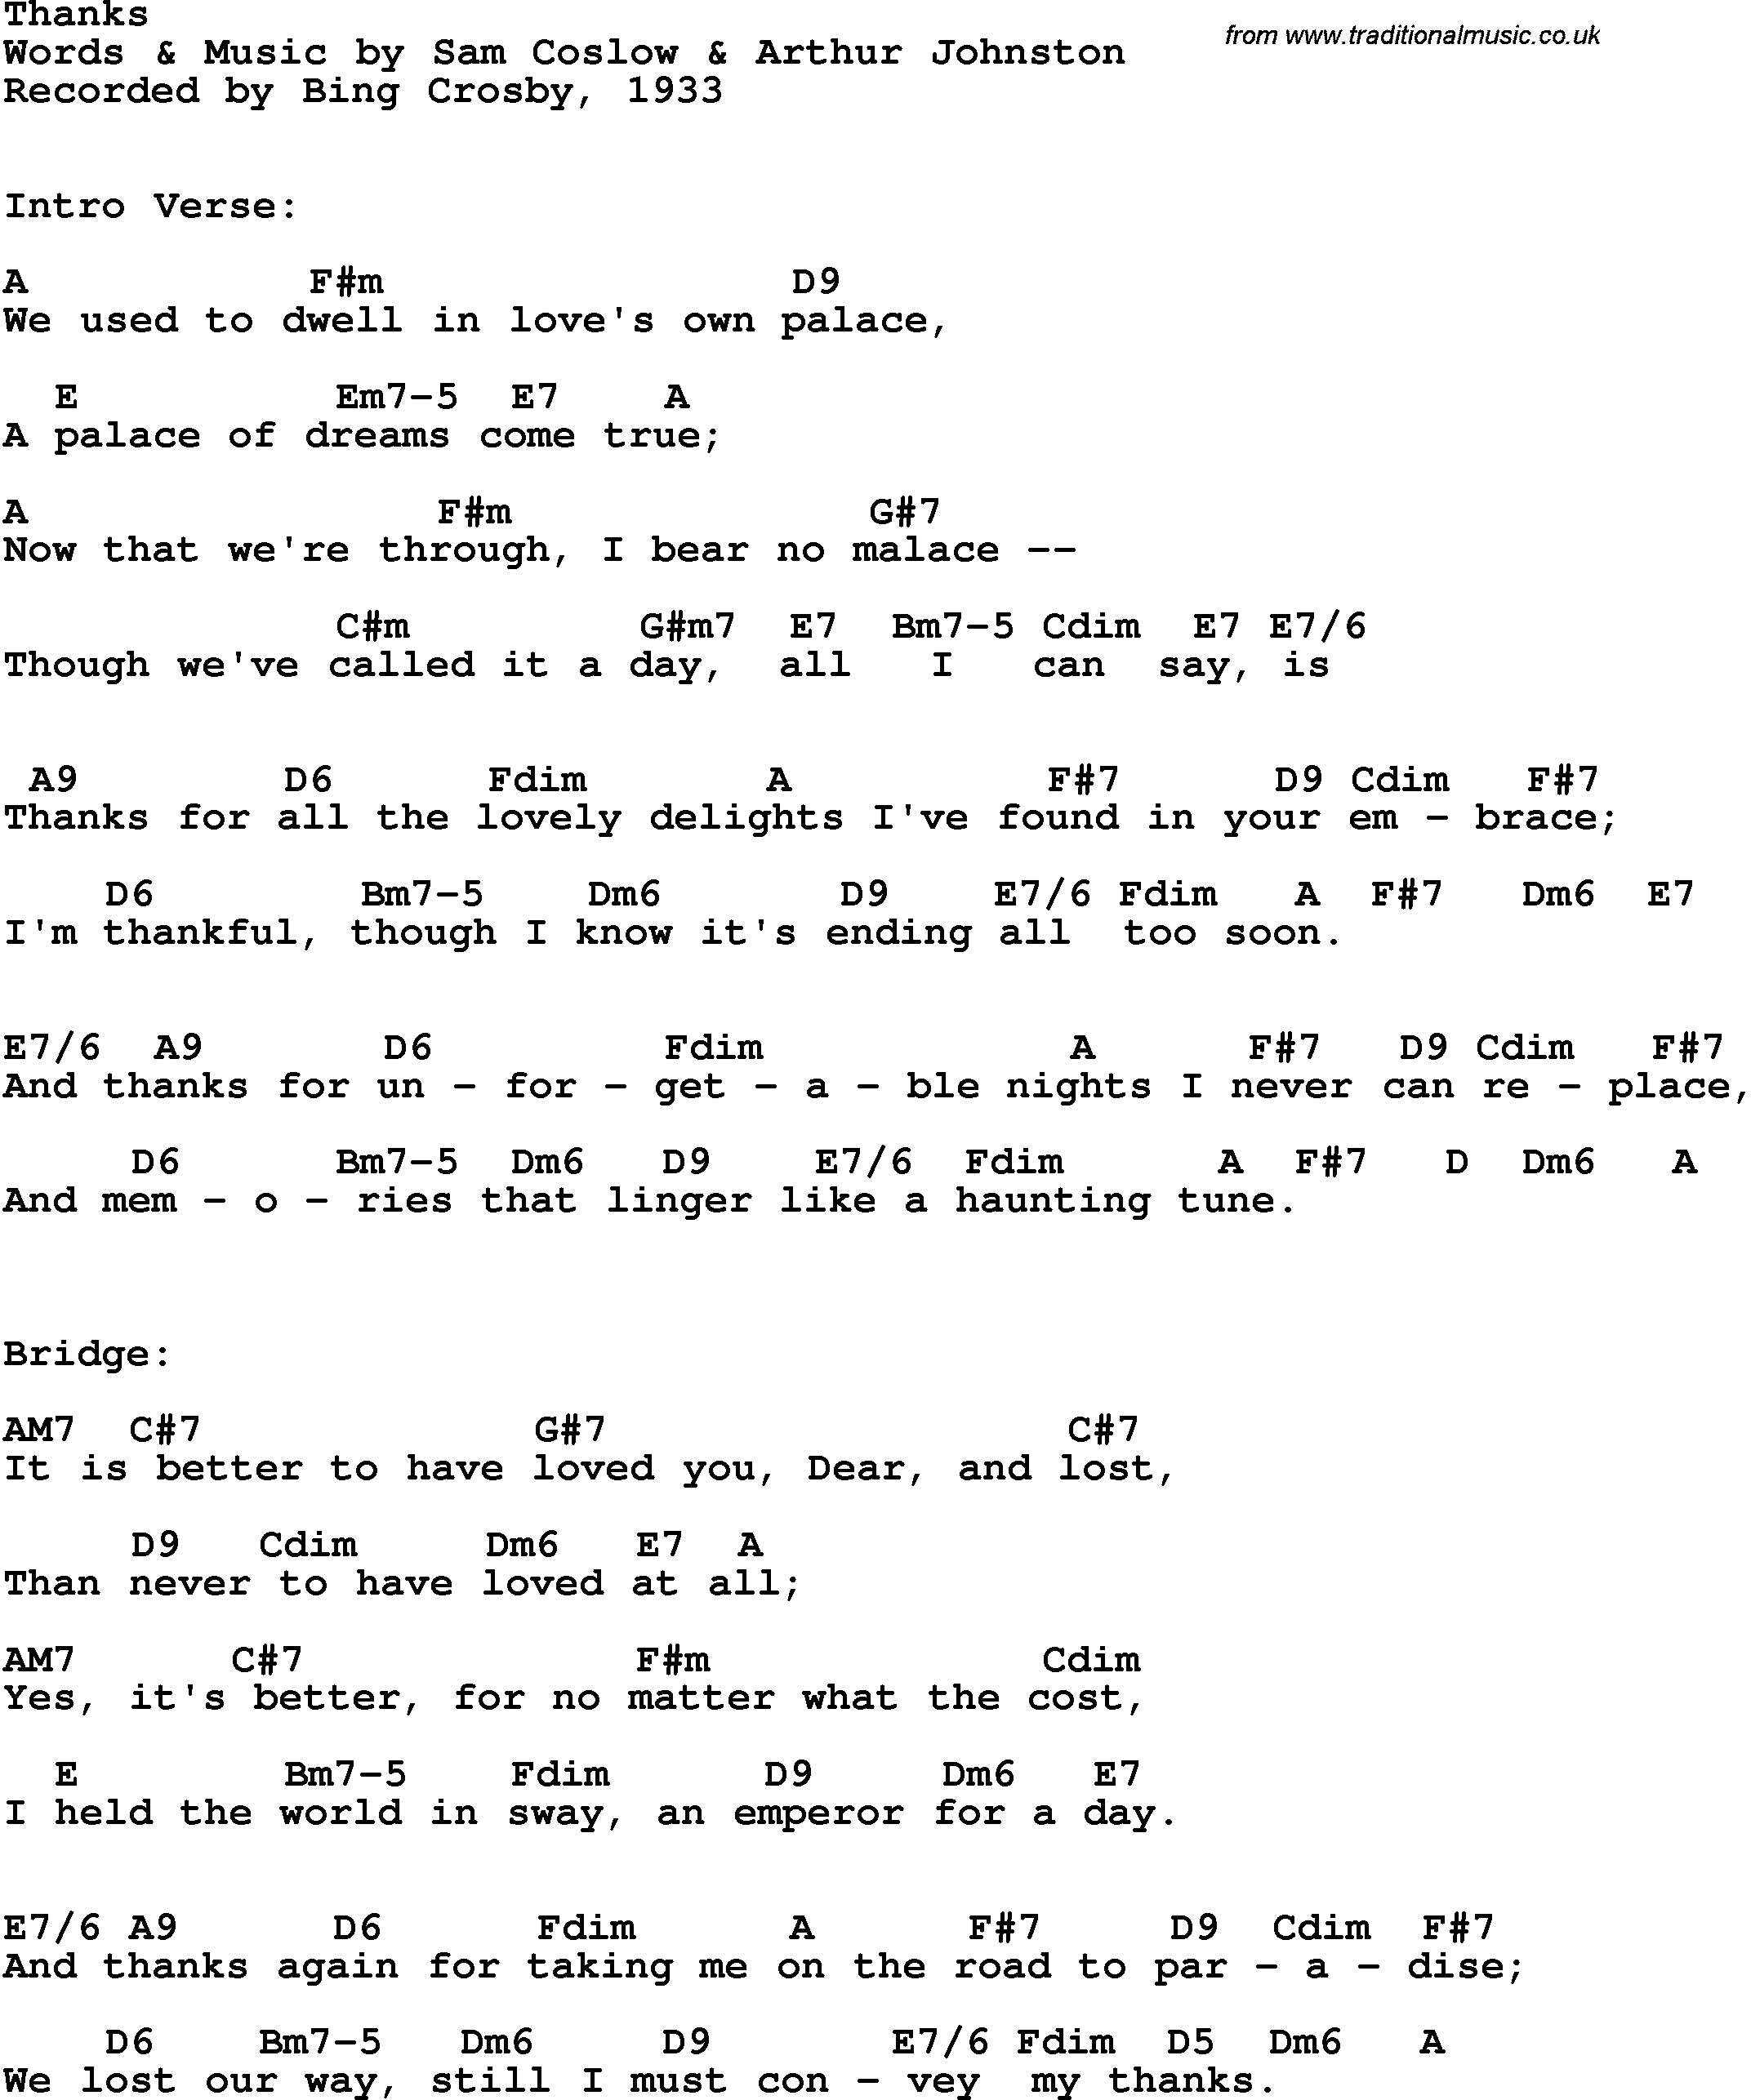 Song Lyrics with guitar chords for Thanks - Bing Crosby, 1933